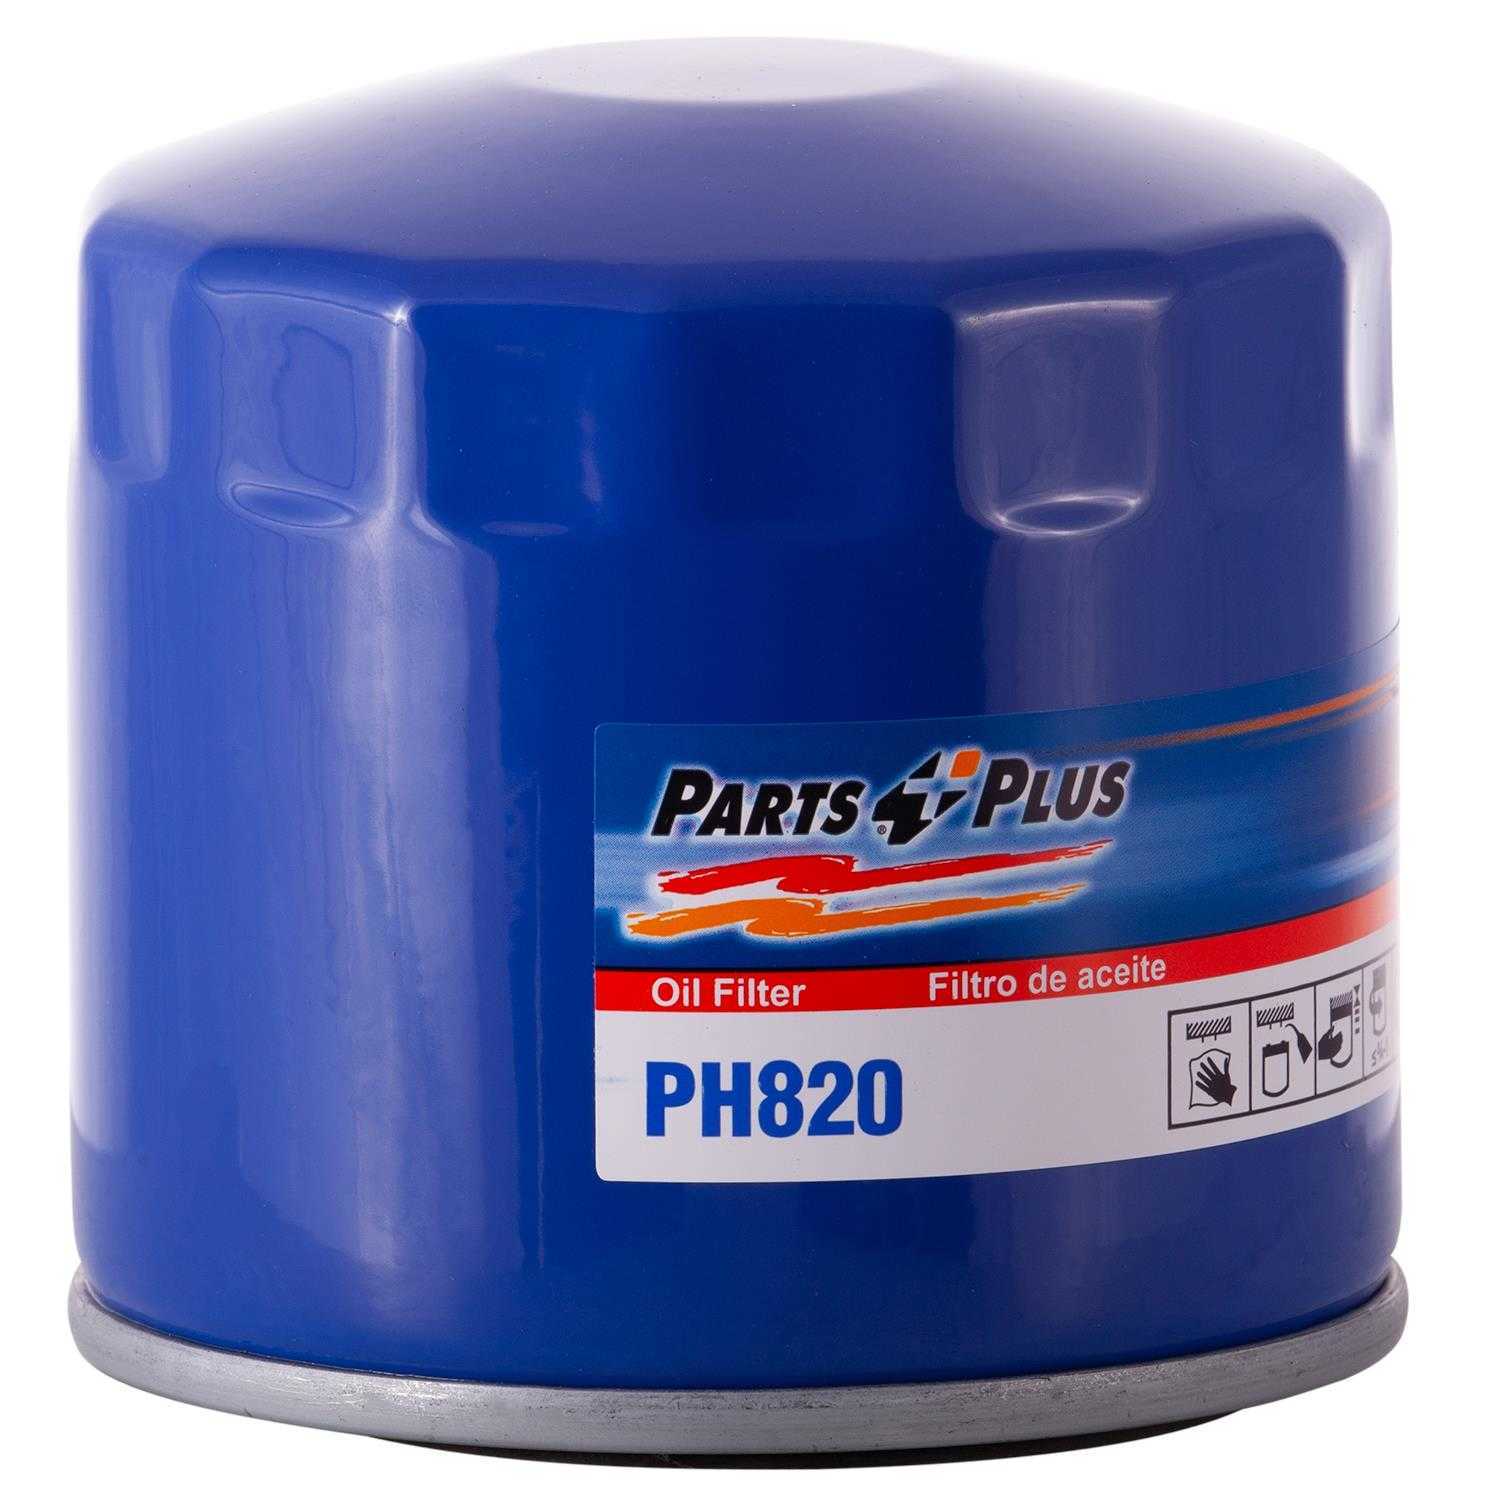 PARTS PLUS FILTERS BY PREMIUM GUARD - Standard Life Oil Filter - PLF PH820